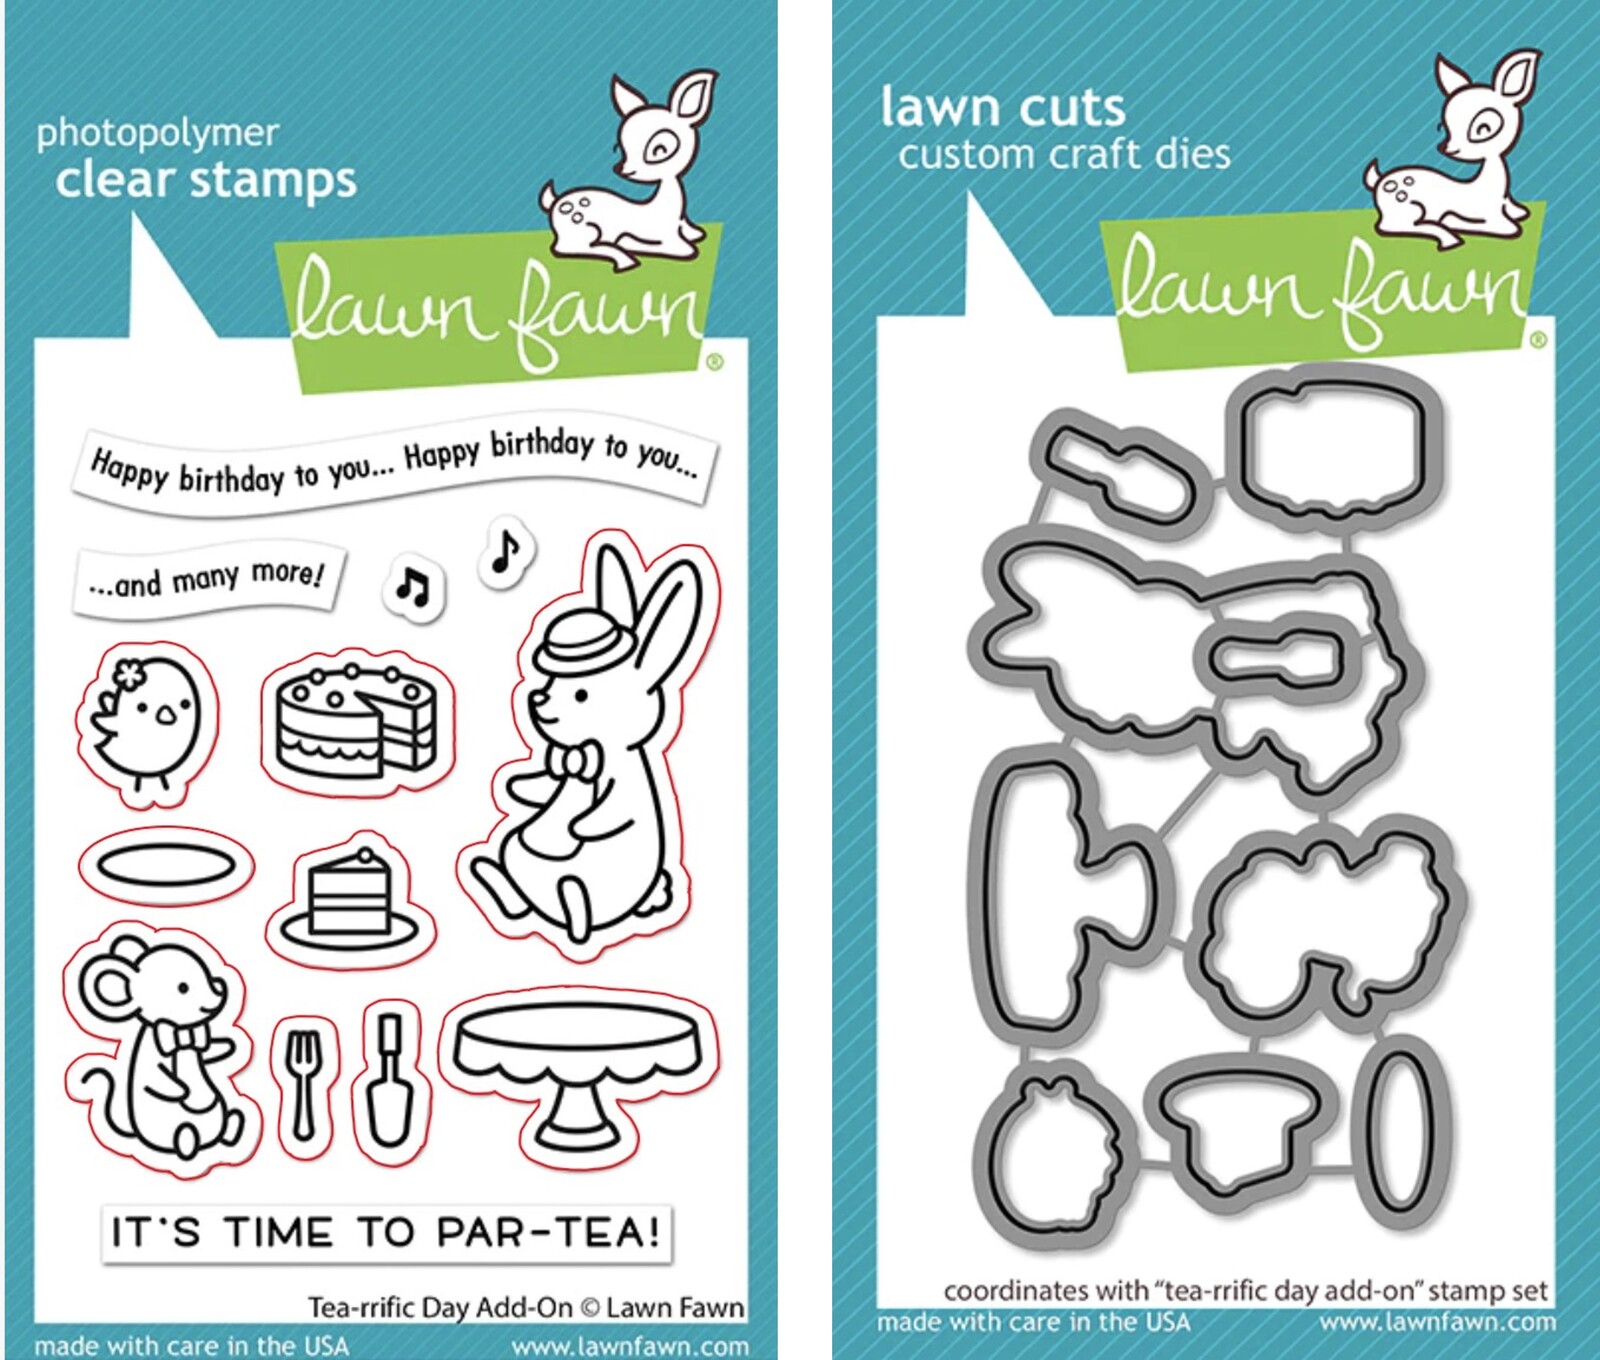 Lawn Fawn Tea-Riffic Day Add-On Stamp and Die Bundle